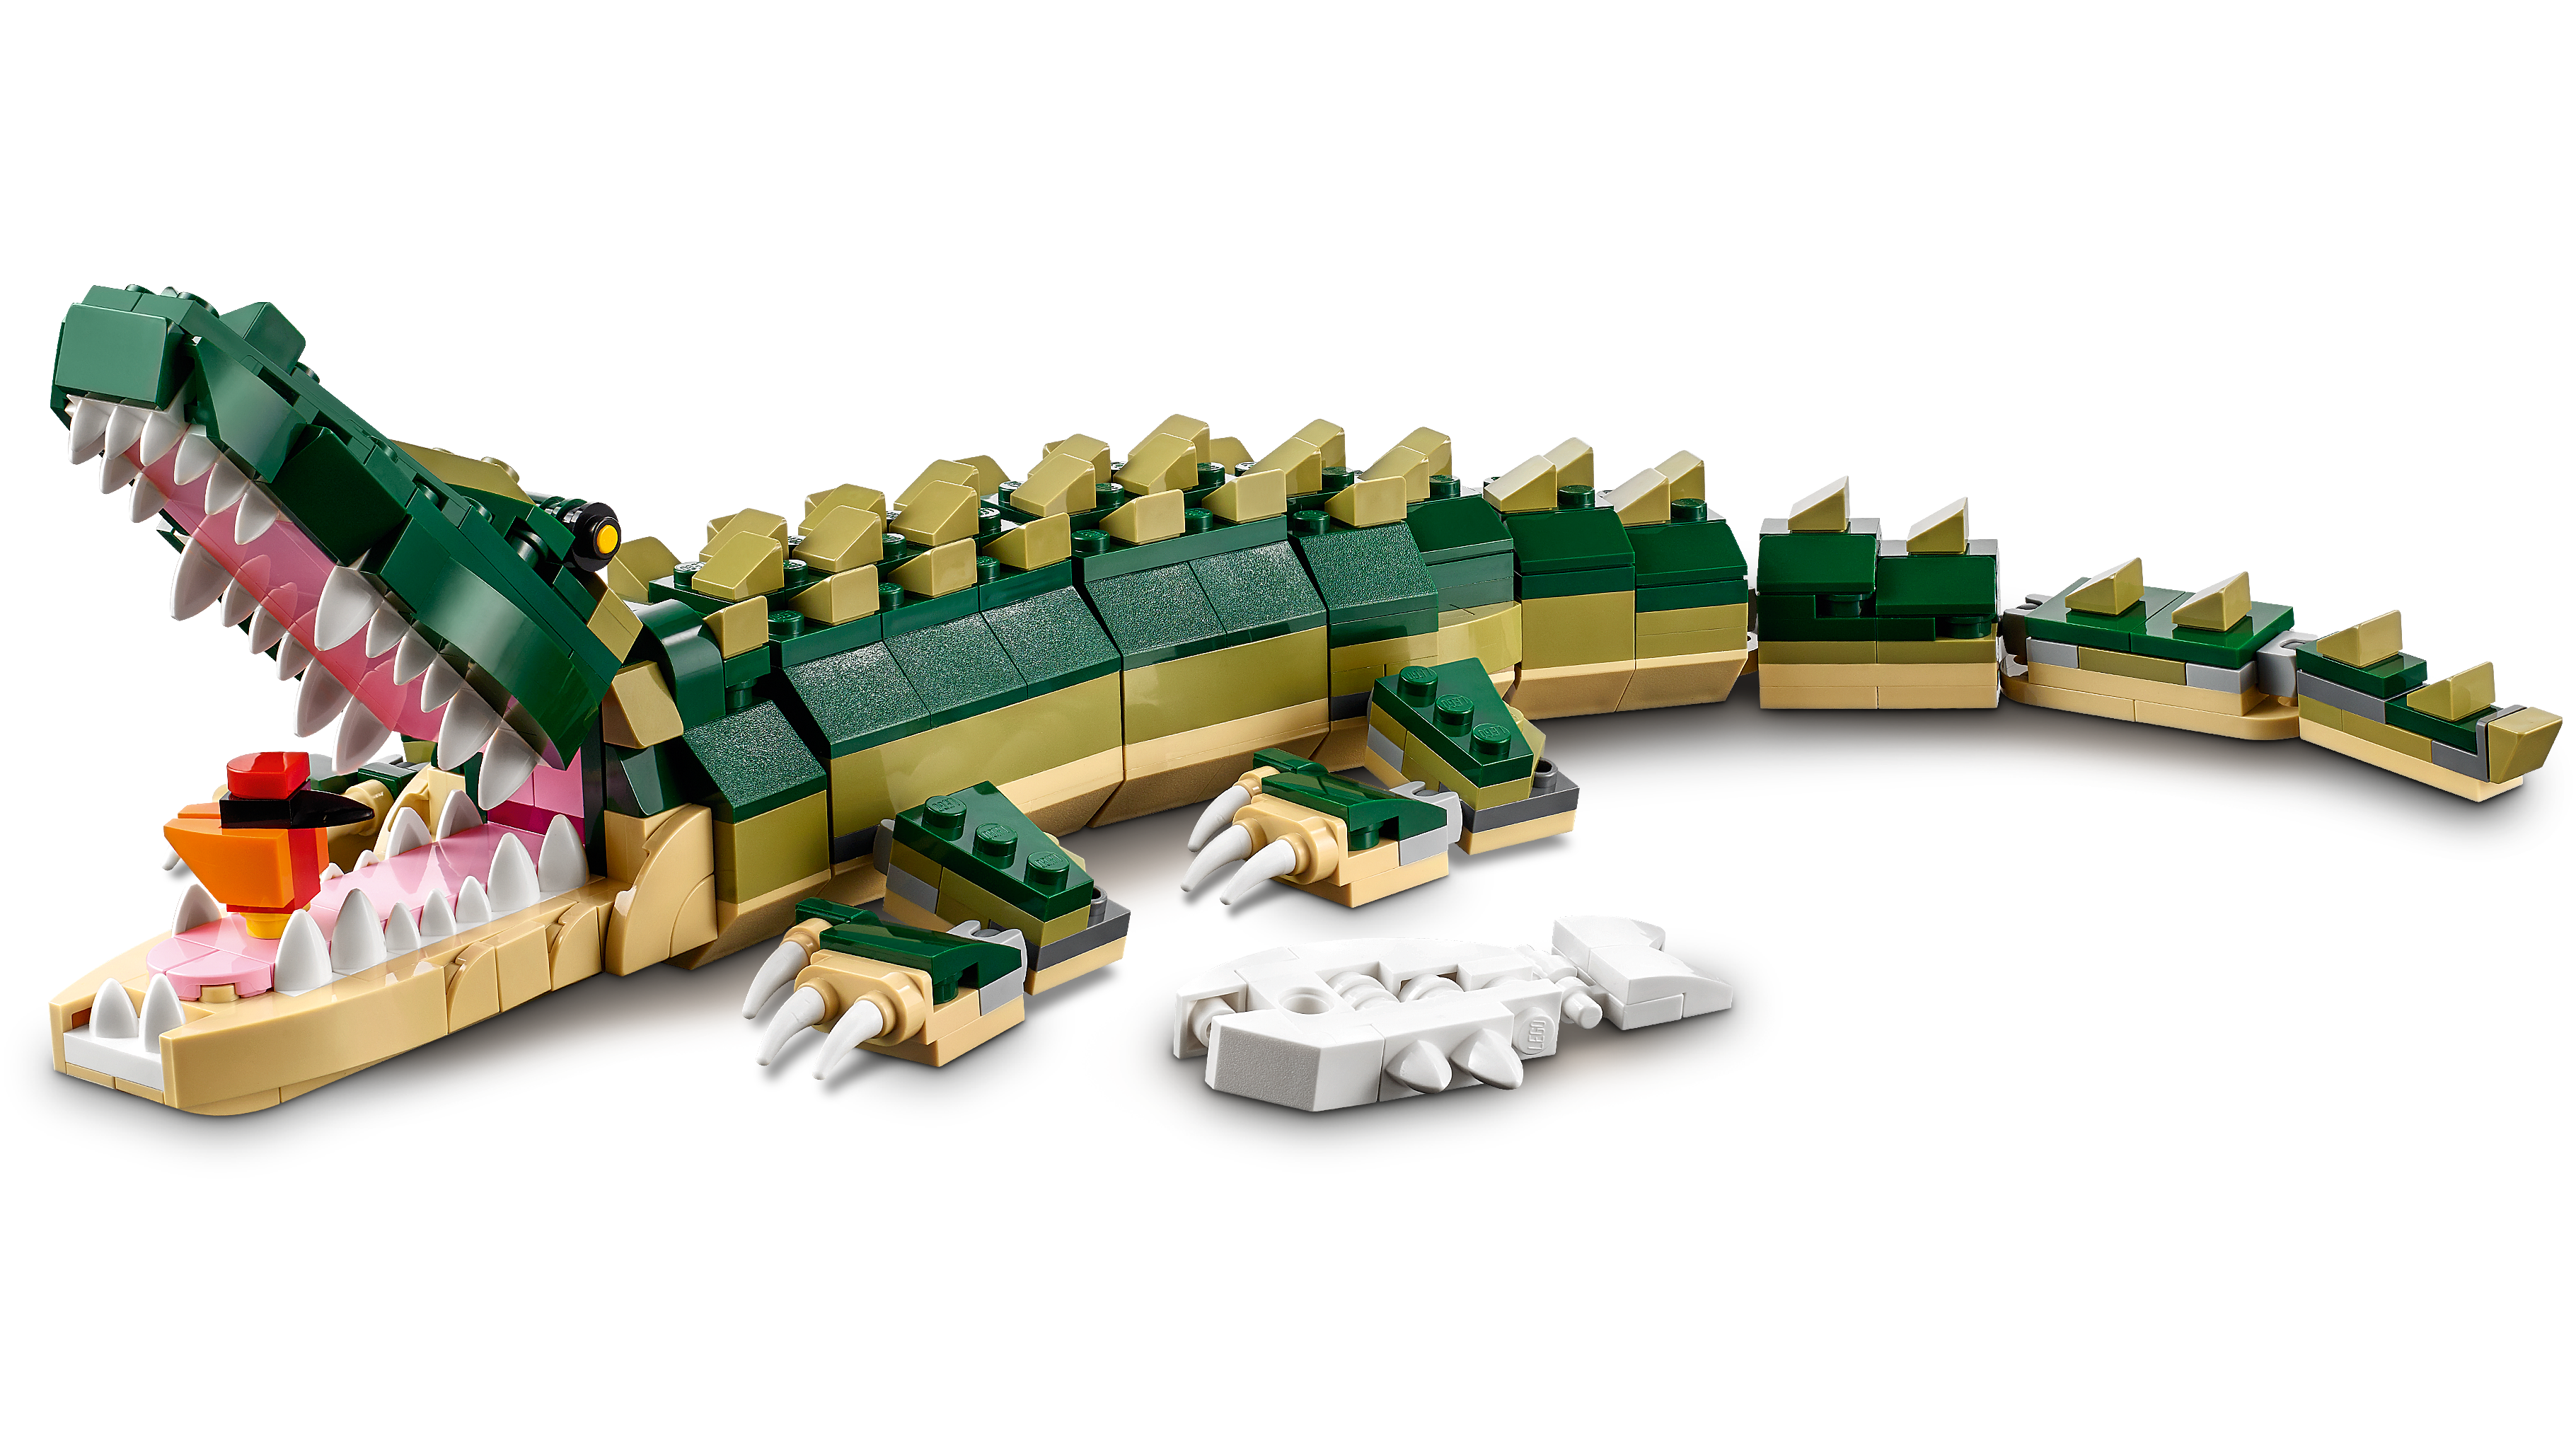 Crocodile 31121 Creator 3-in-1 | Buy online at the Official LEGO® Shop US